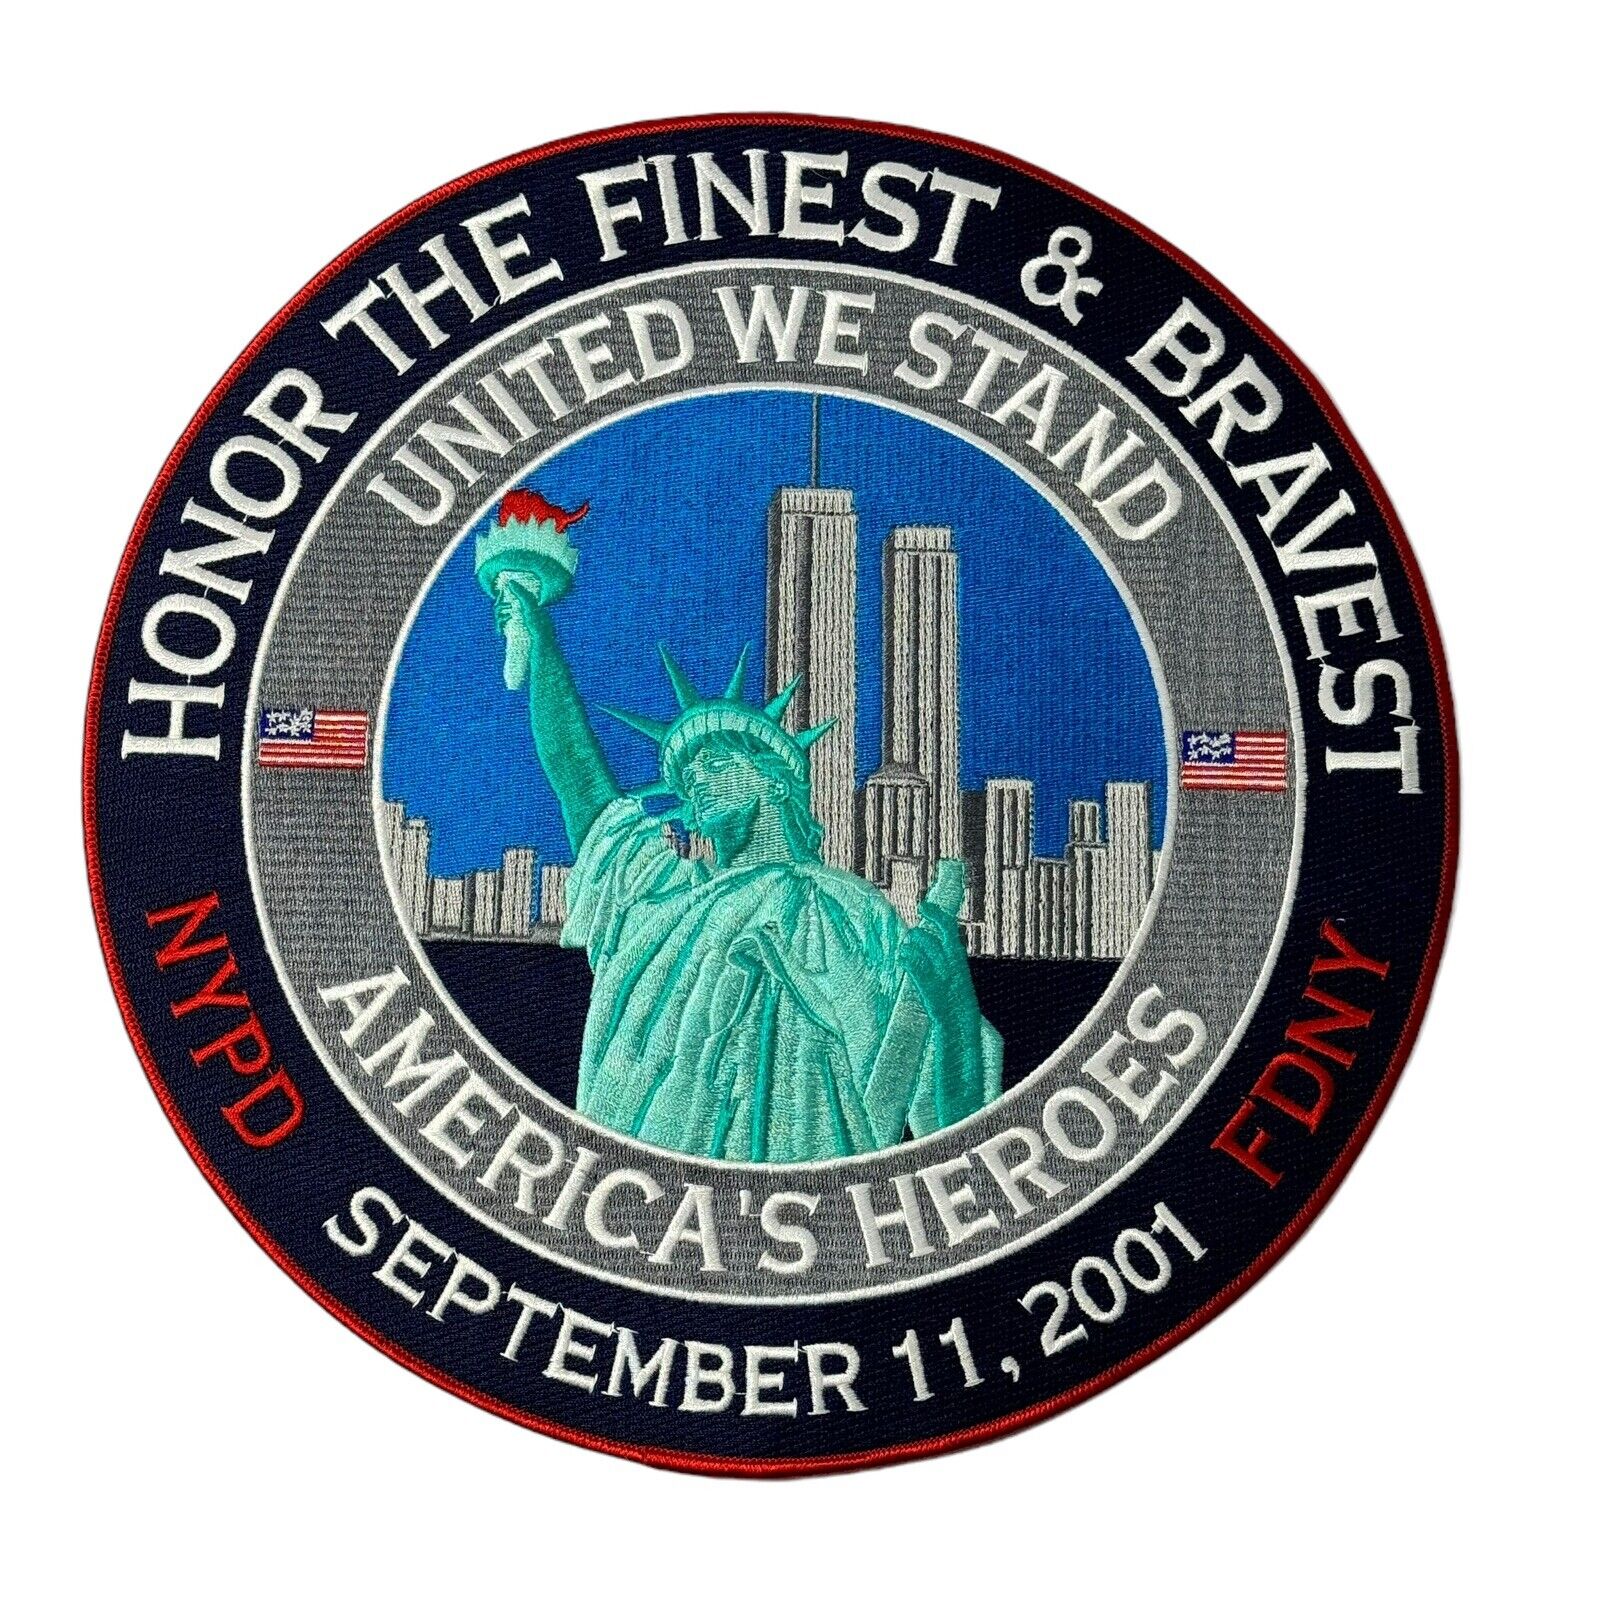 9/11 Embroidered Patch Honor The Finest & Bravest \